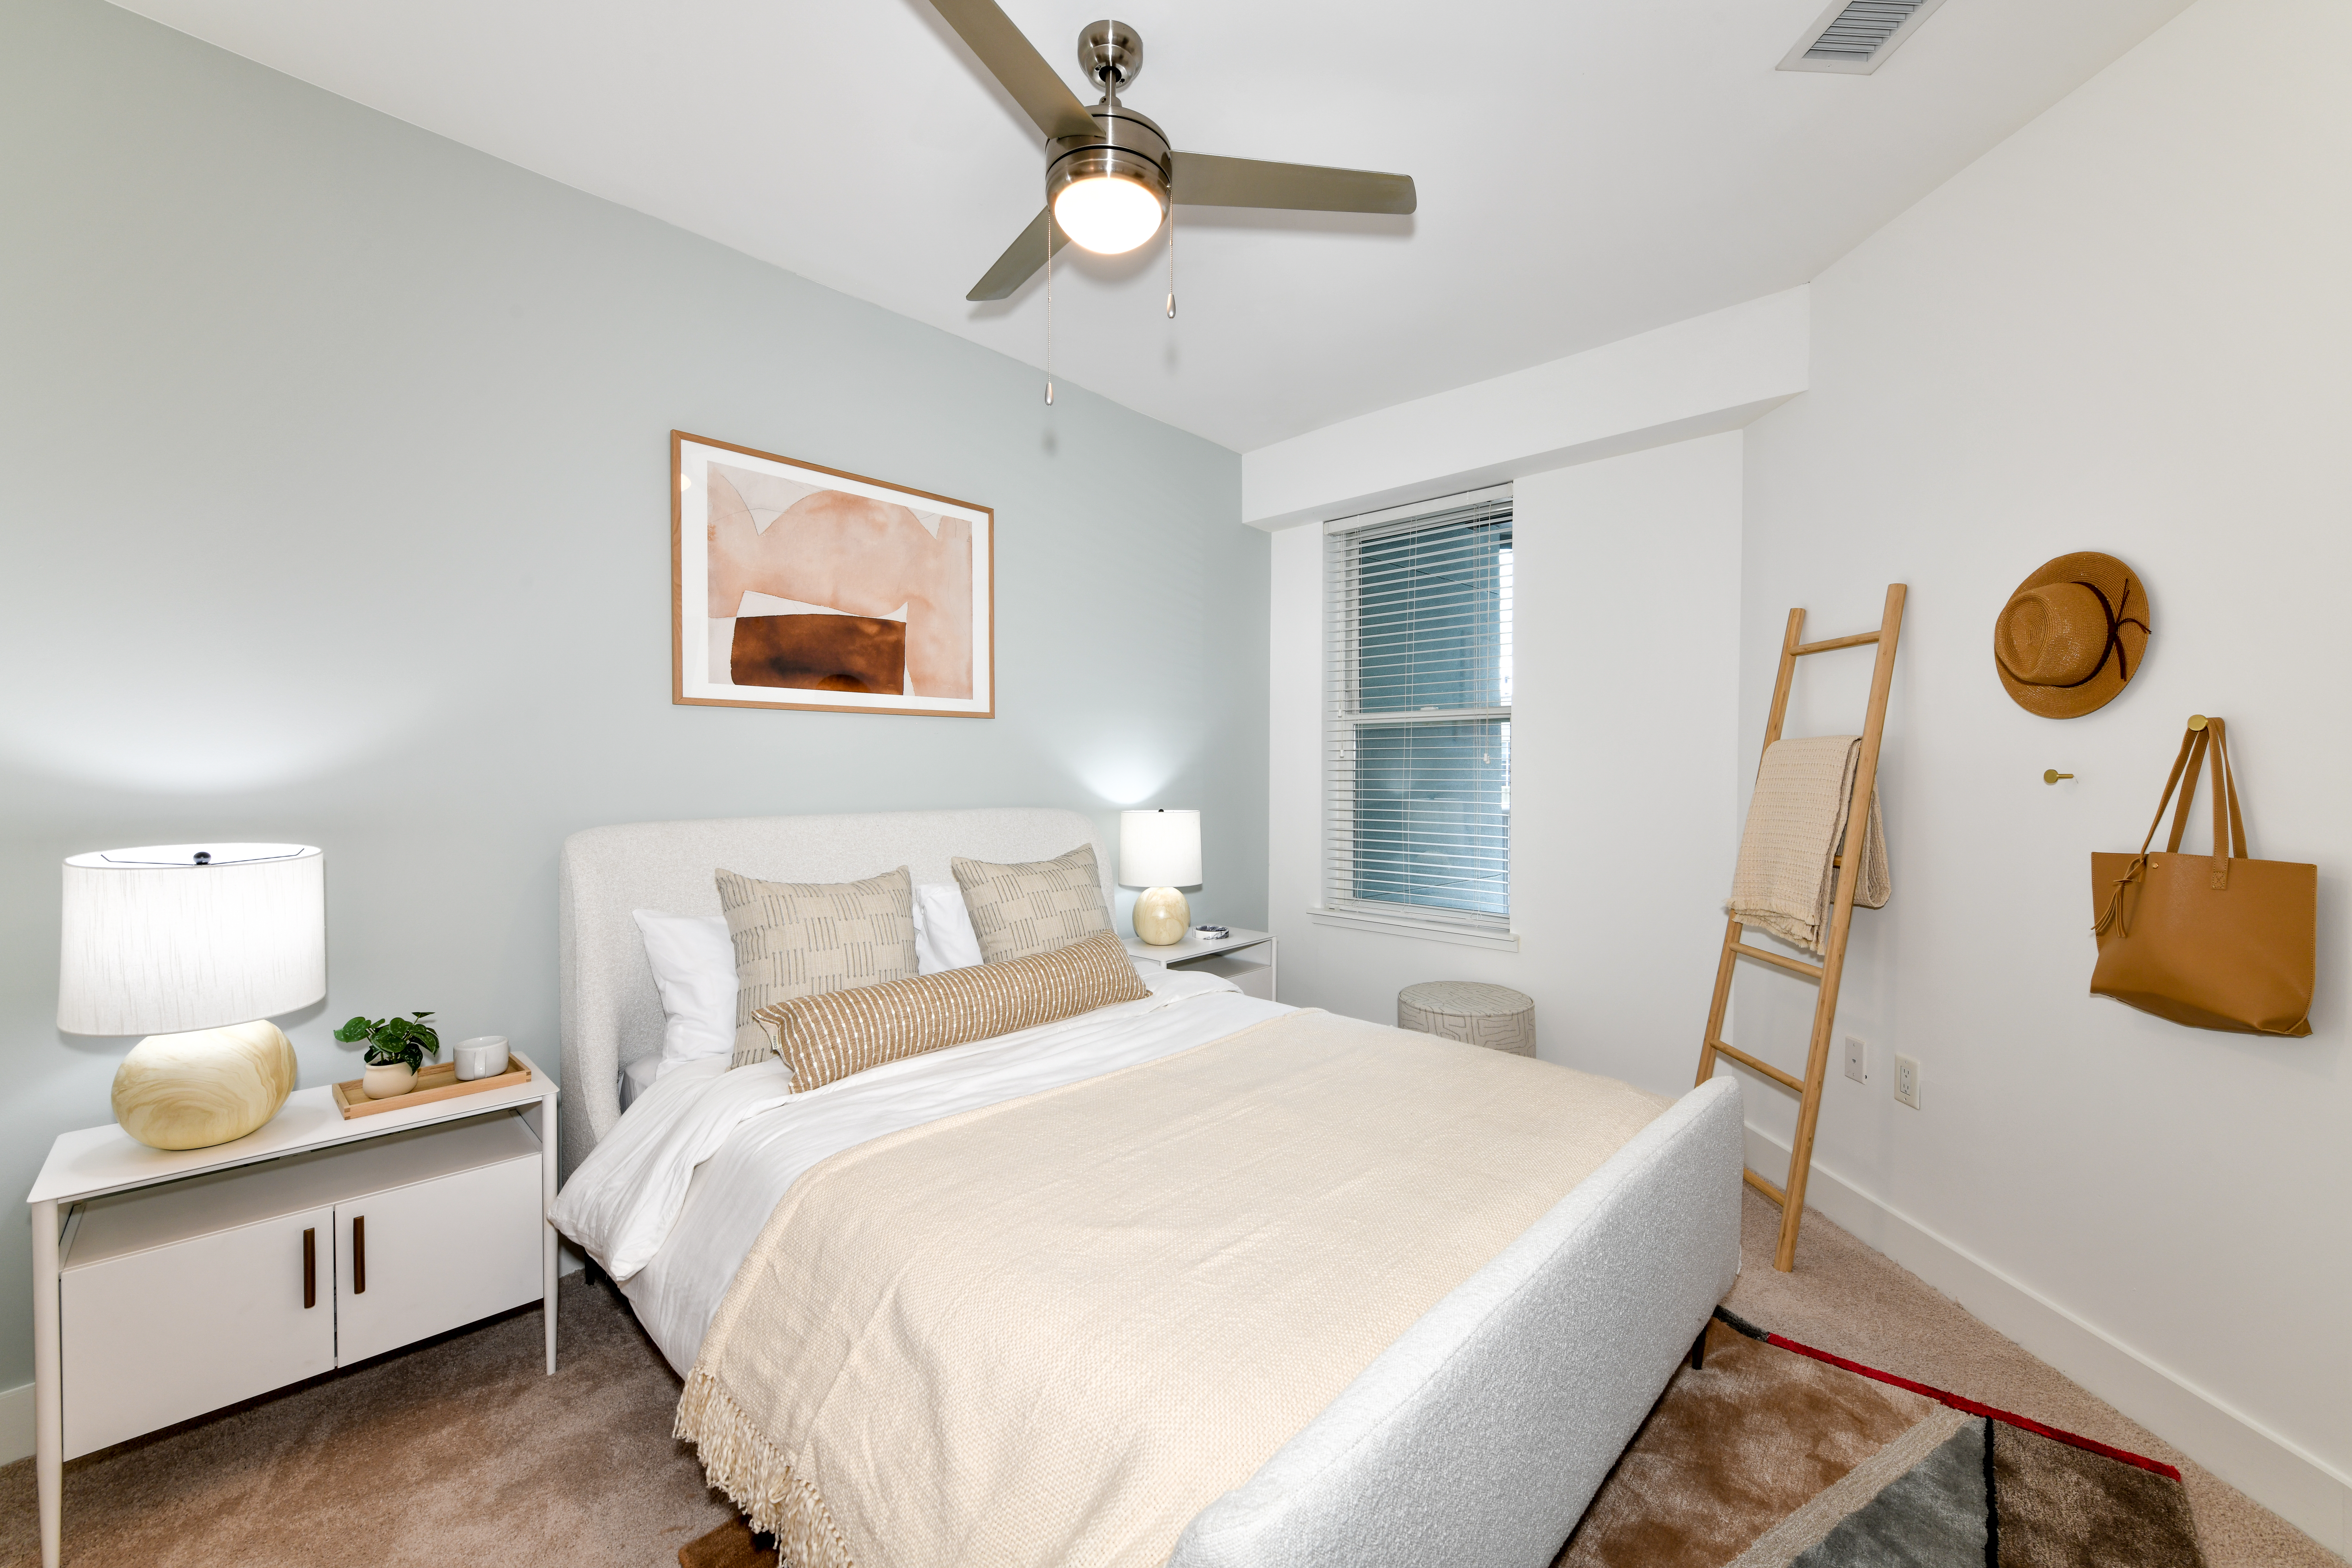 Staged Bedroom with ceiling fan and window